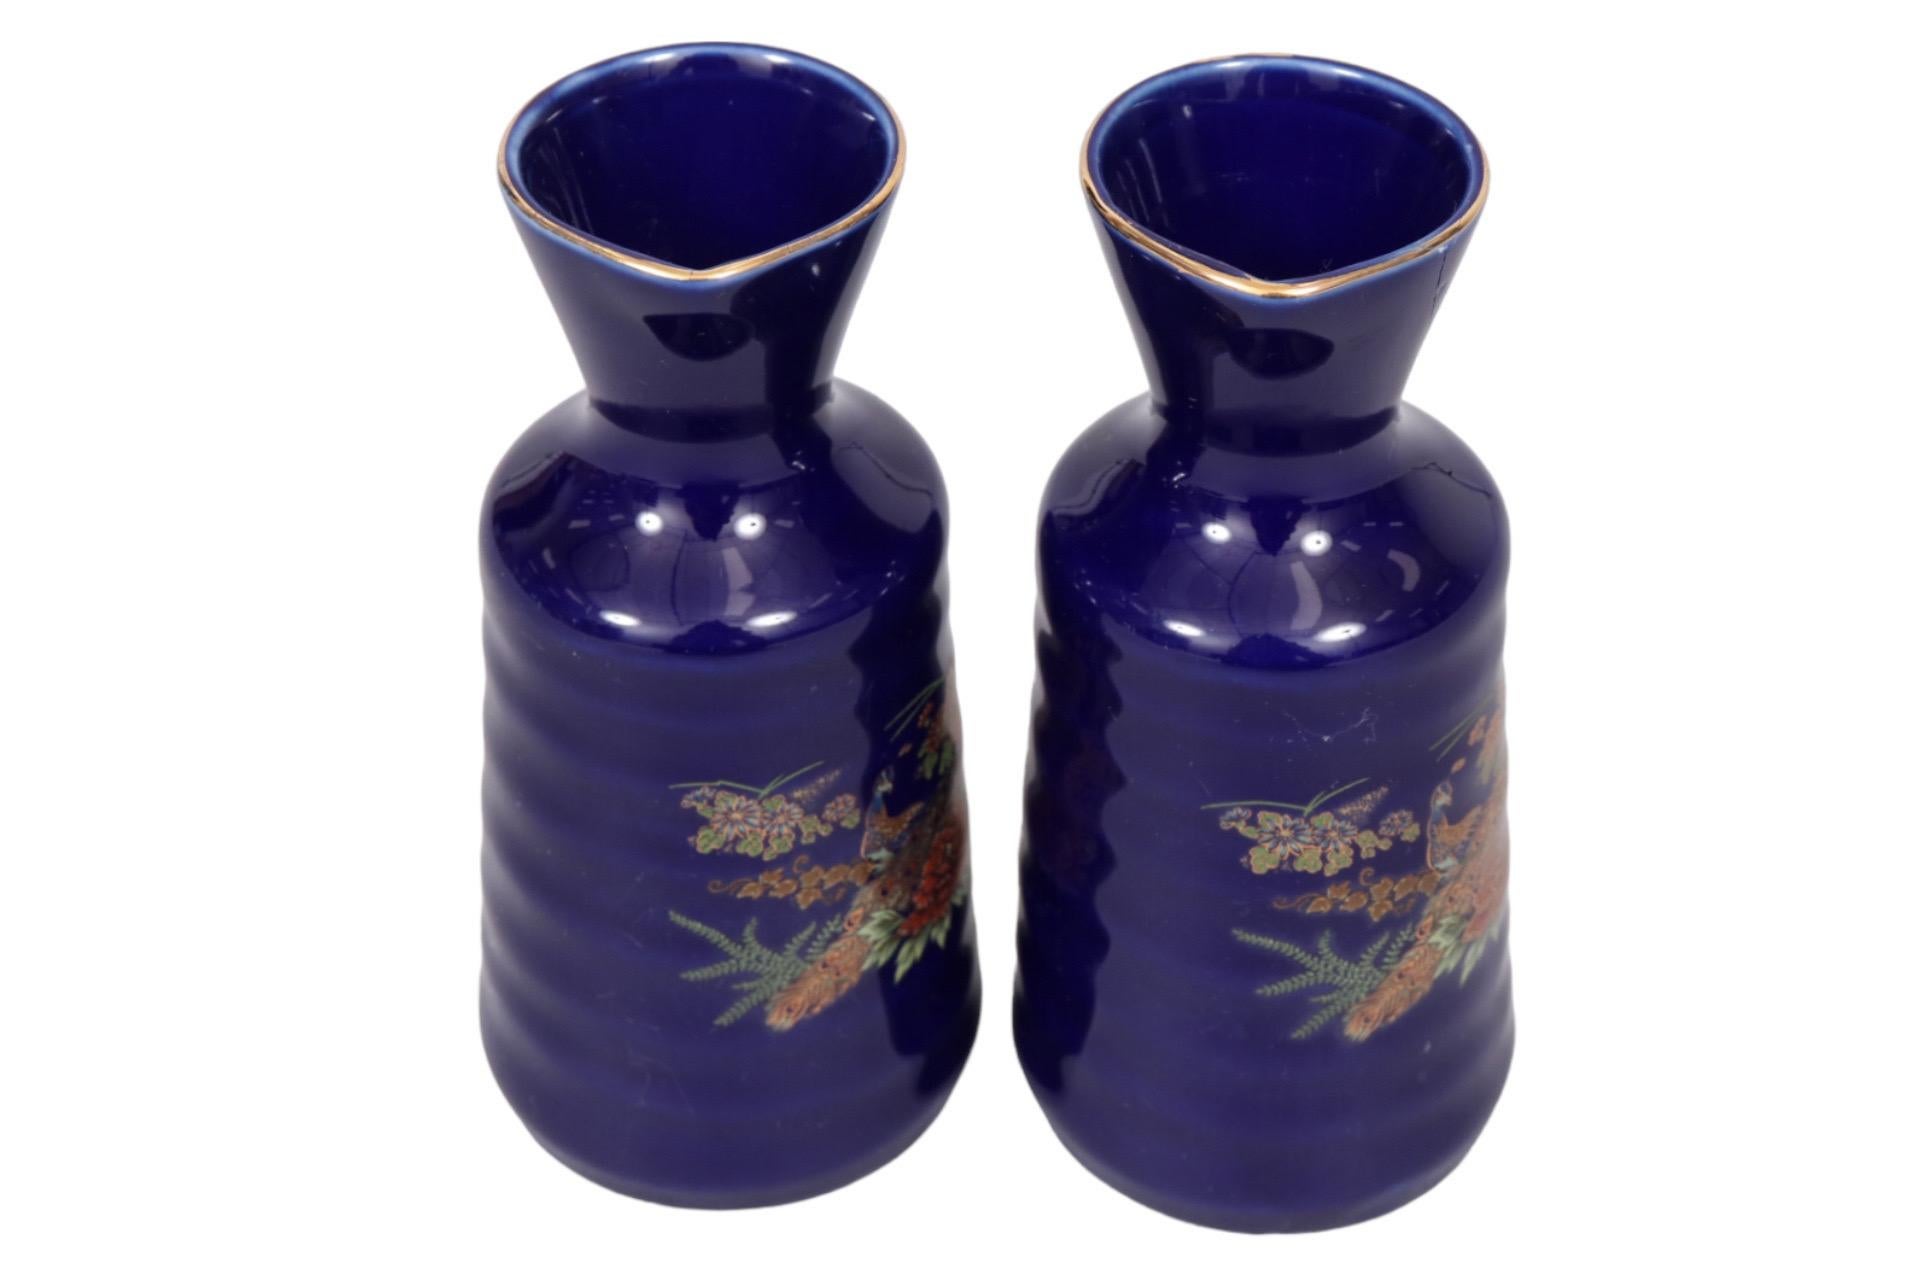 A pair of Kutani hand painted porcelain sake bottles. Cobalt blue rippled bodies are decorated in front with peacocks among red roses. Marked “Kutani” underneath in Kanji, framed in a square. Dimensions per bottle.